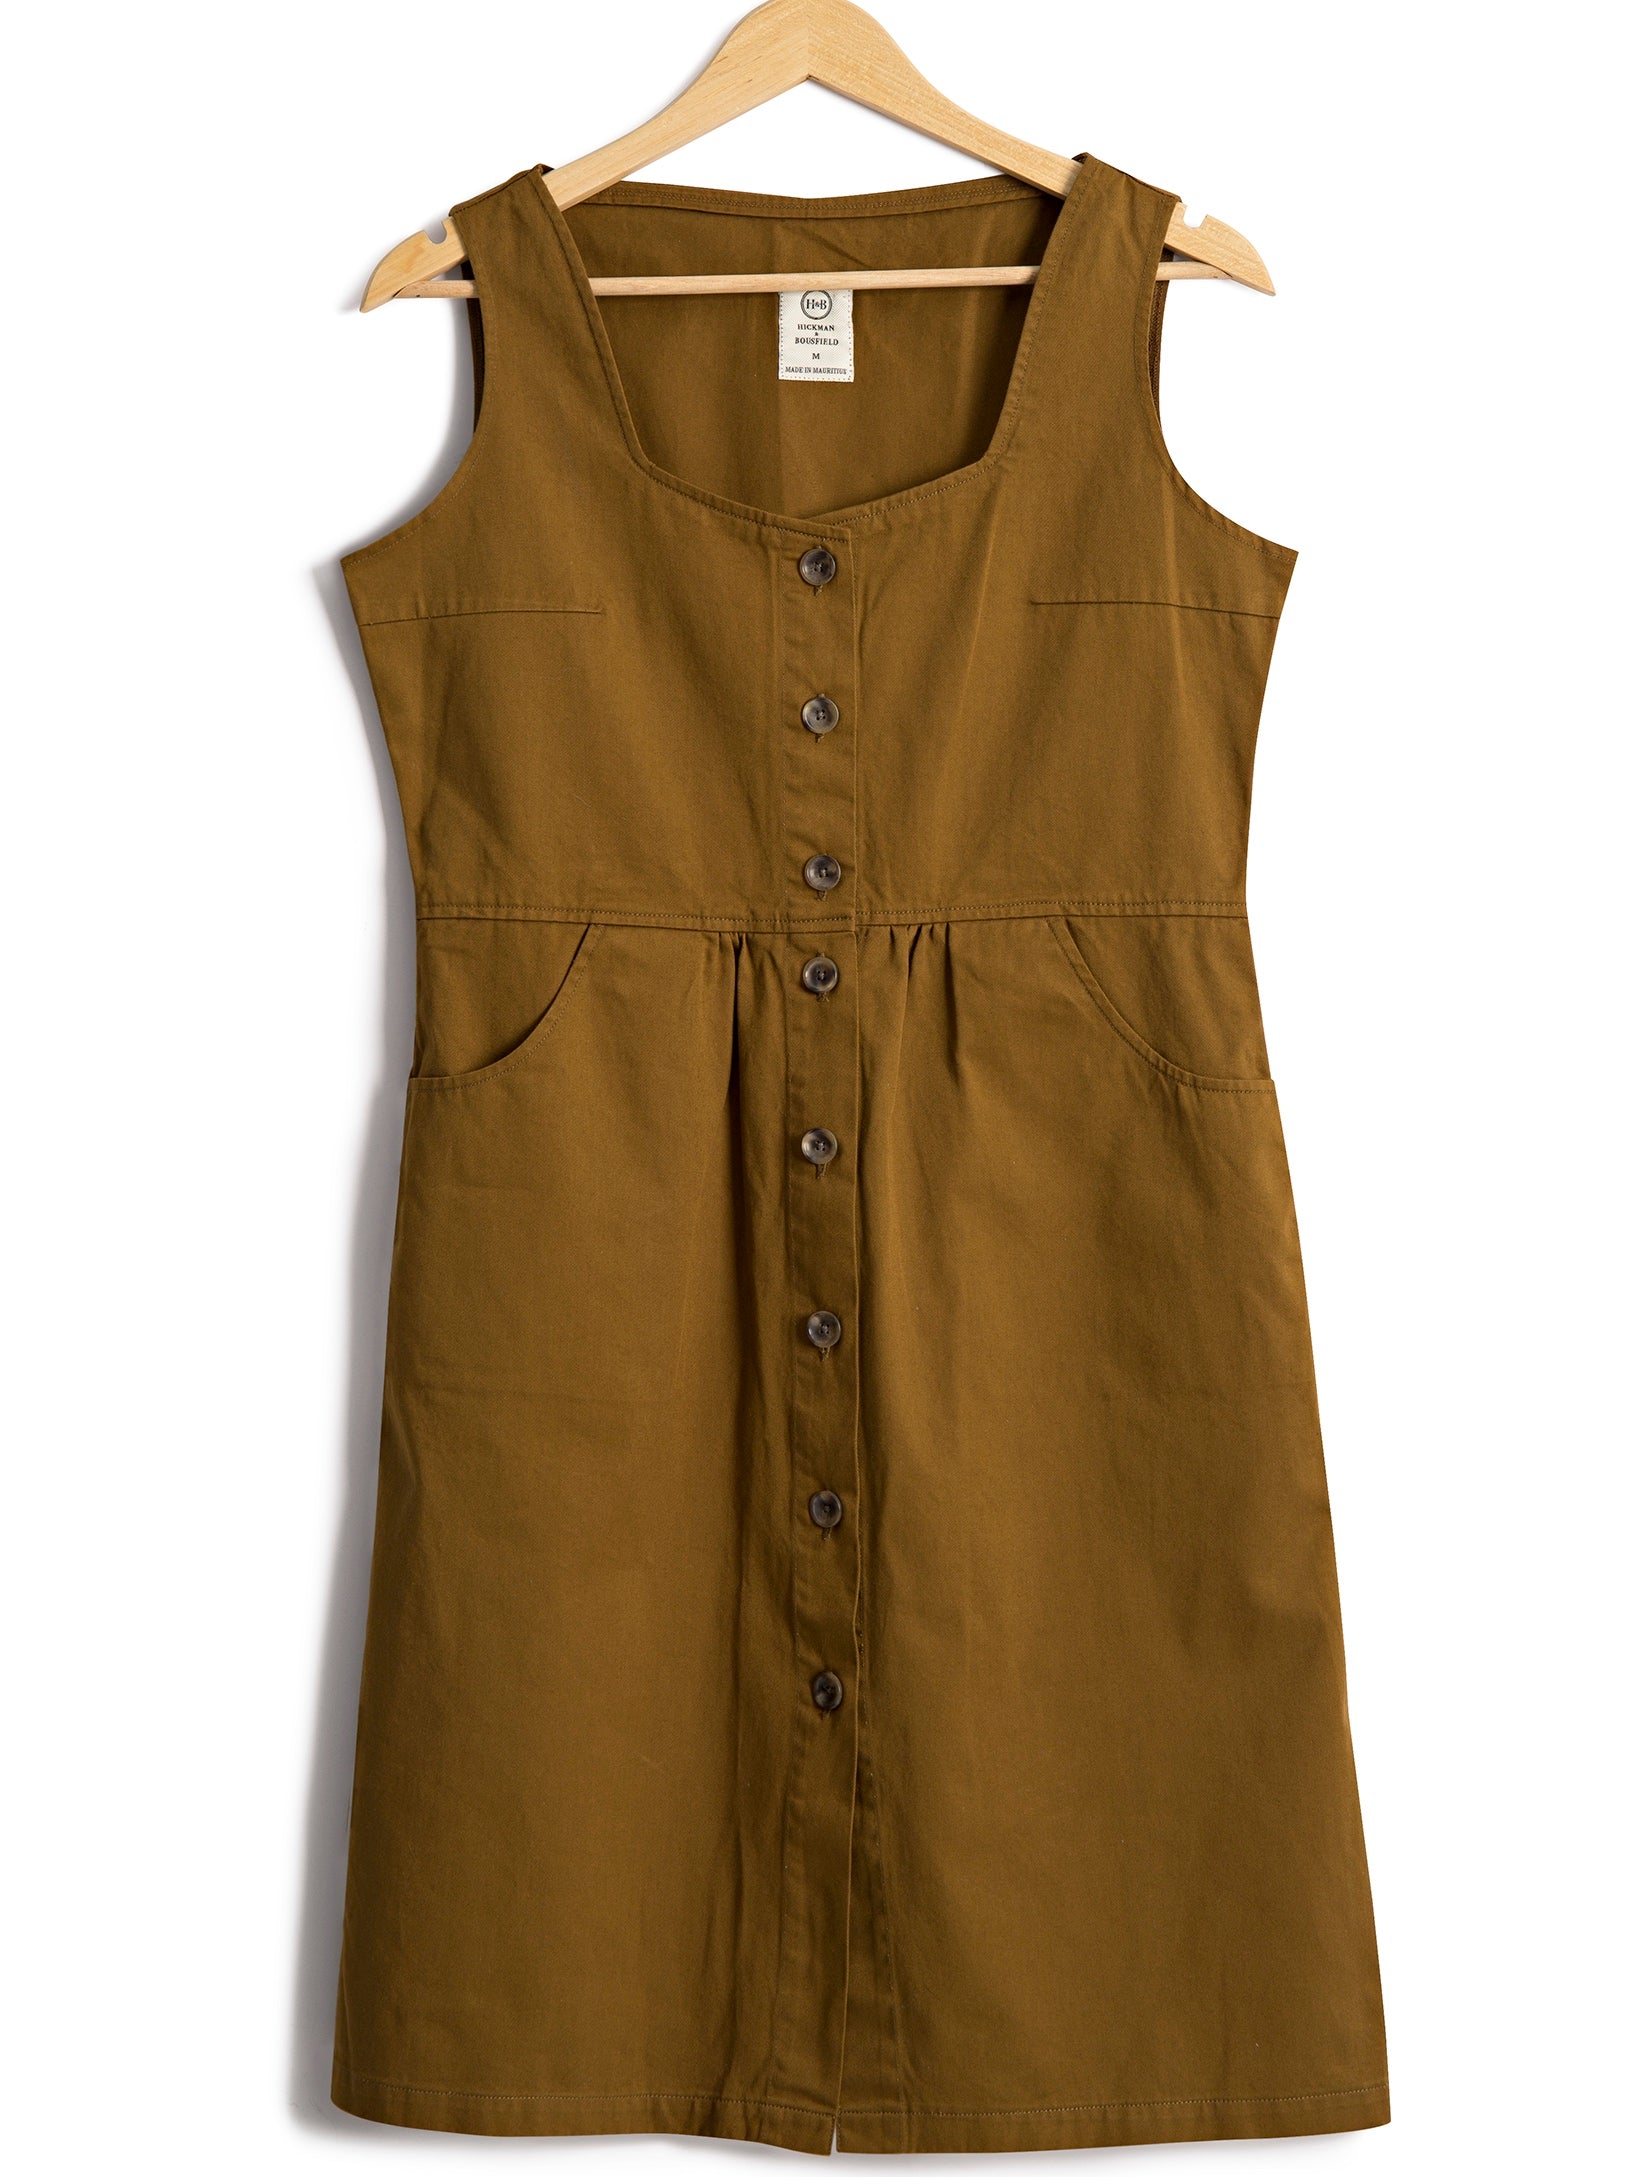 Sundress in Cotton Twill, Dress, Hickman & Bousfield - Hickman & Bousfield, Safari and Travel Clothing